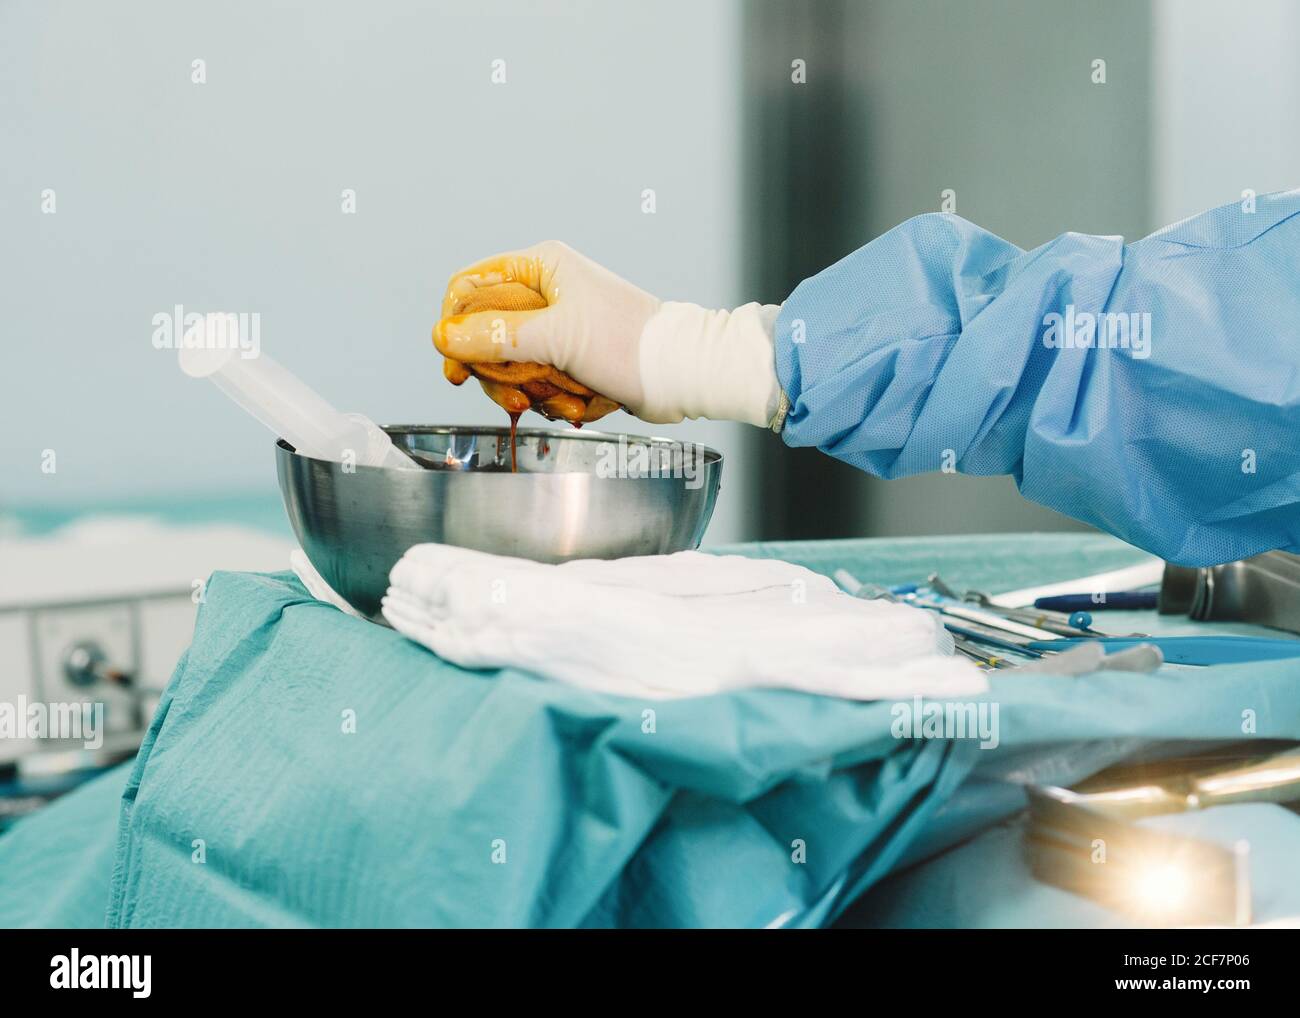 Crop hand of medic in blue gown and white glove squeezing tampon full of  iodine in bowl during surgery Stock Photo - Alamy